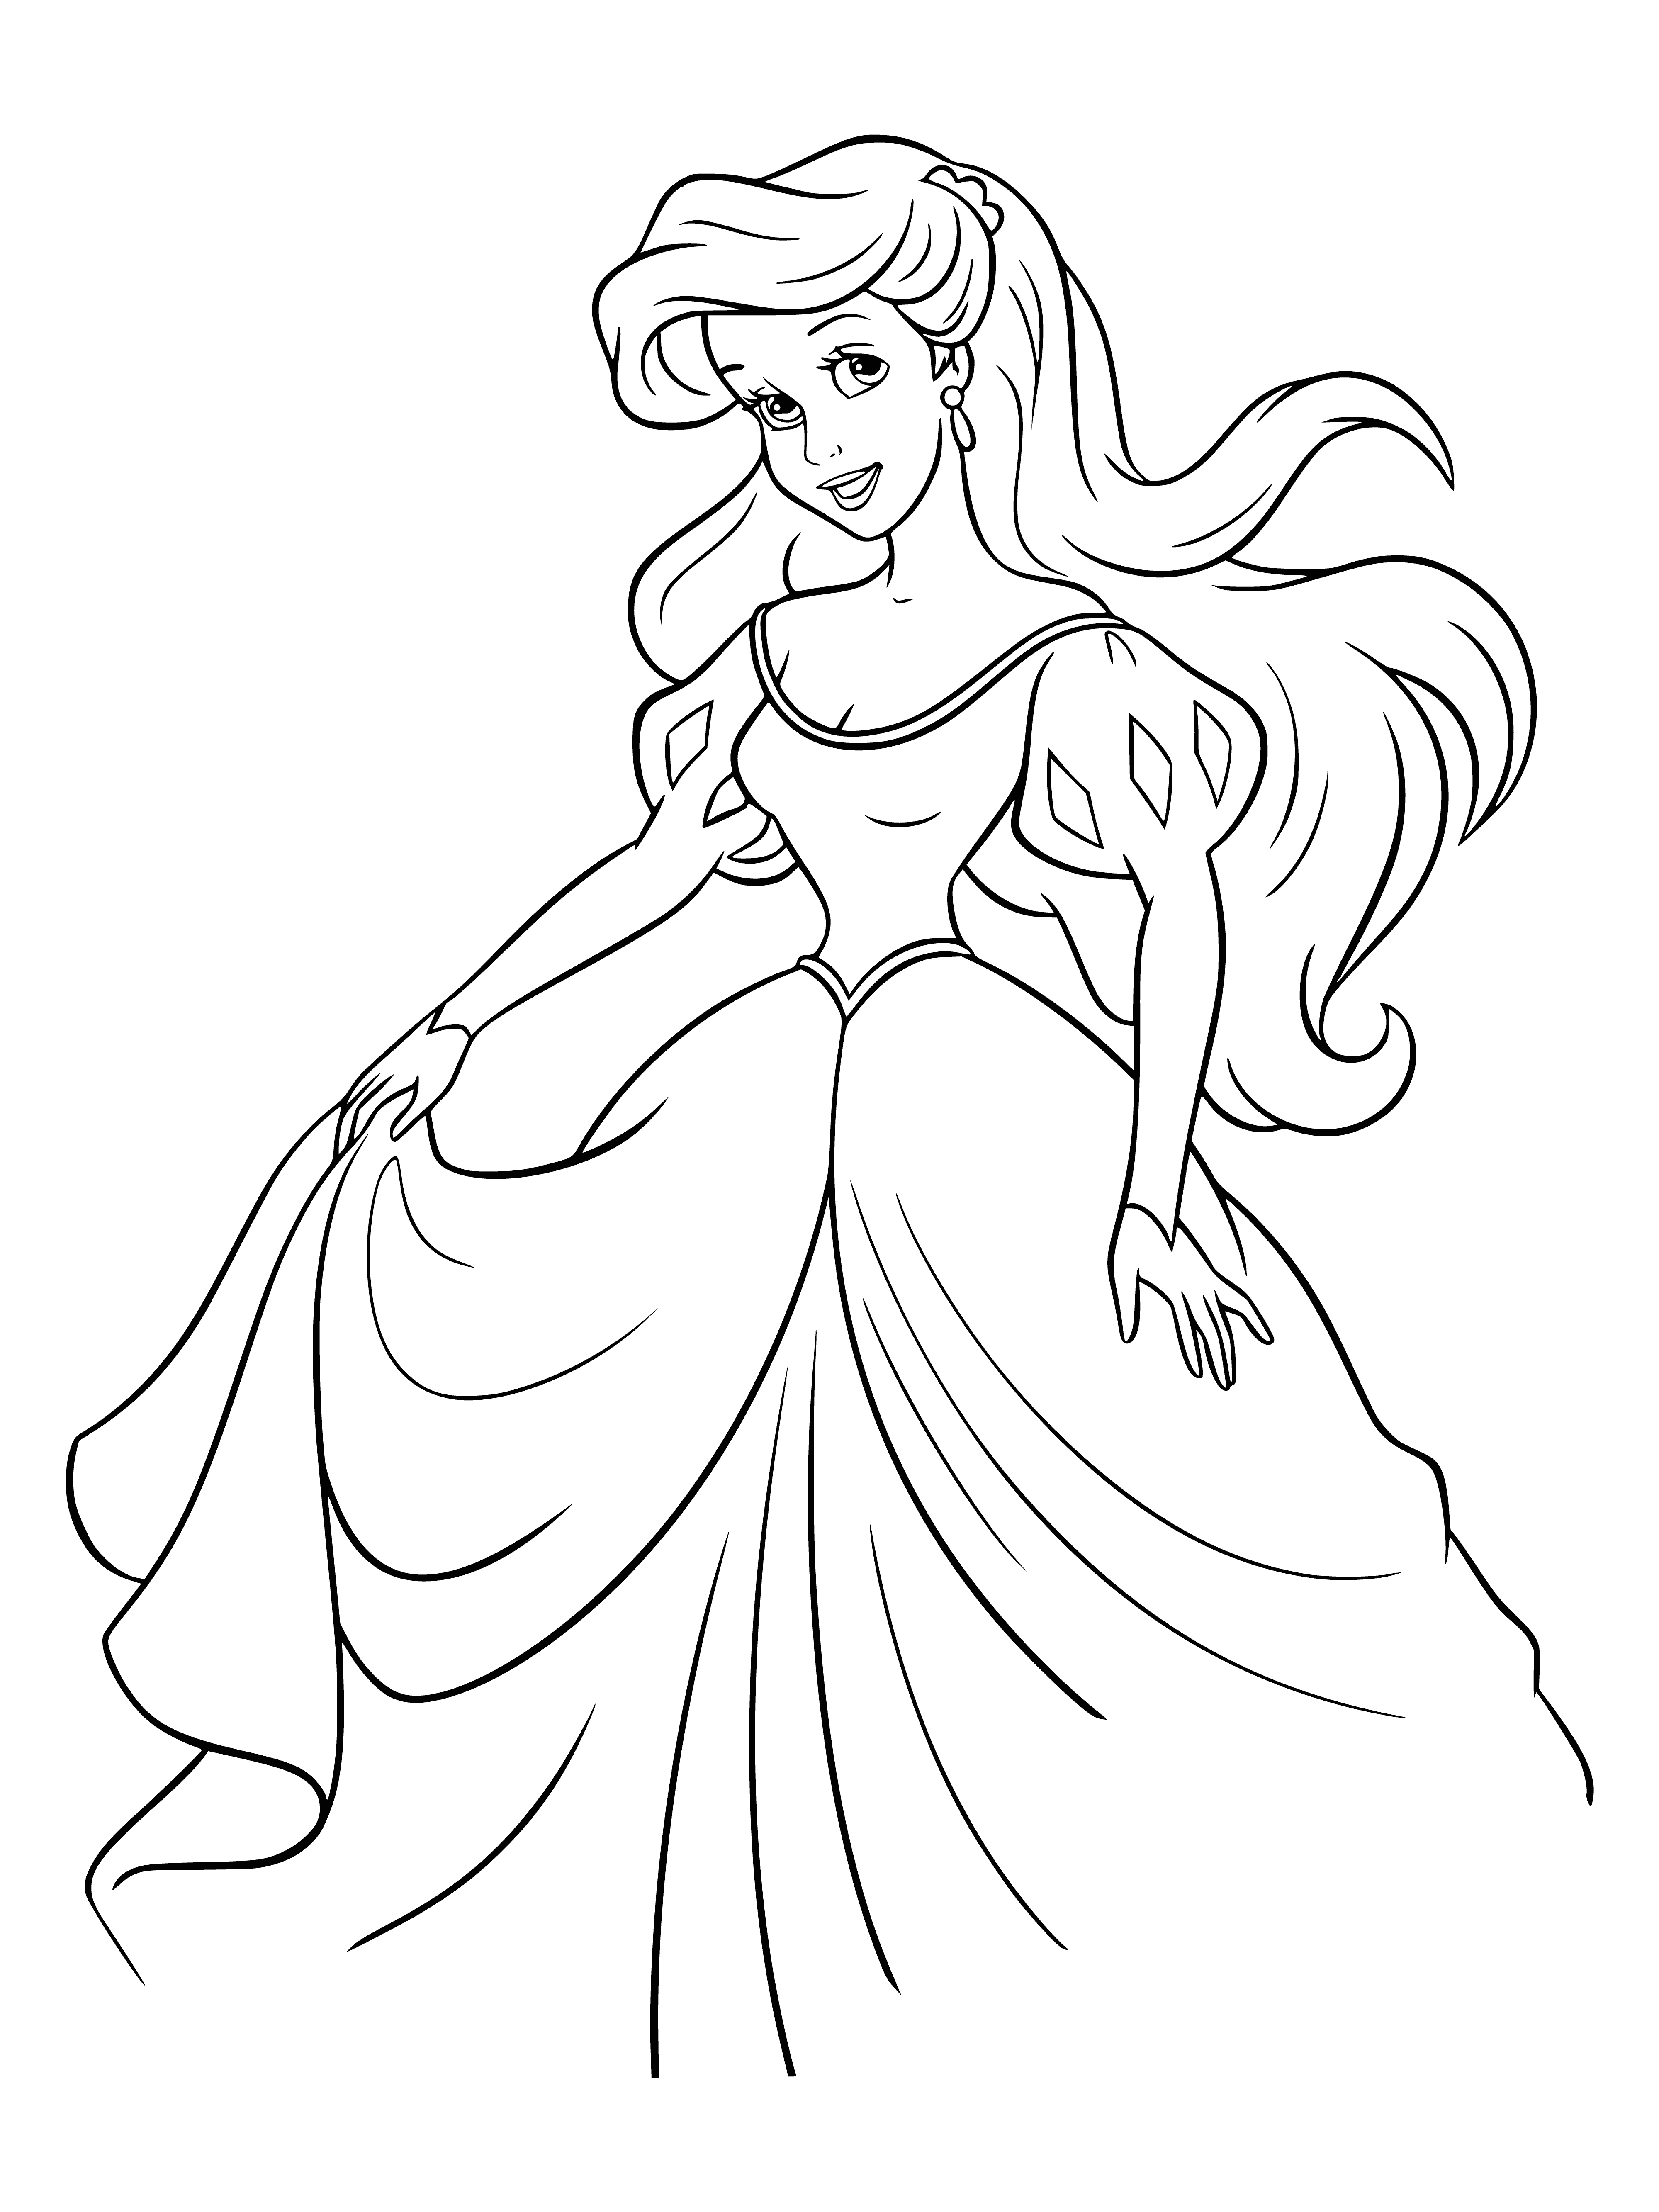 coloring page: Ariel is a delicate woman with long red hair and big green eyes with light freckles, wearing a green dress and white apron, holding a pink flower.